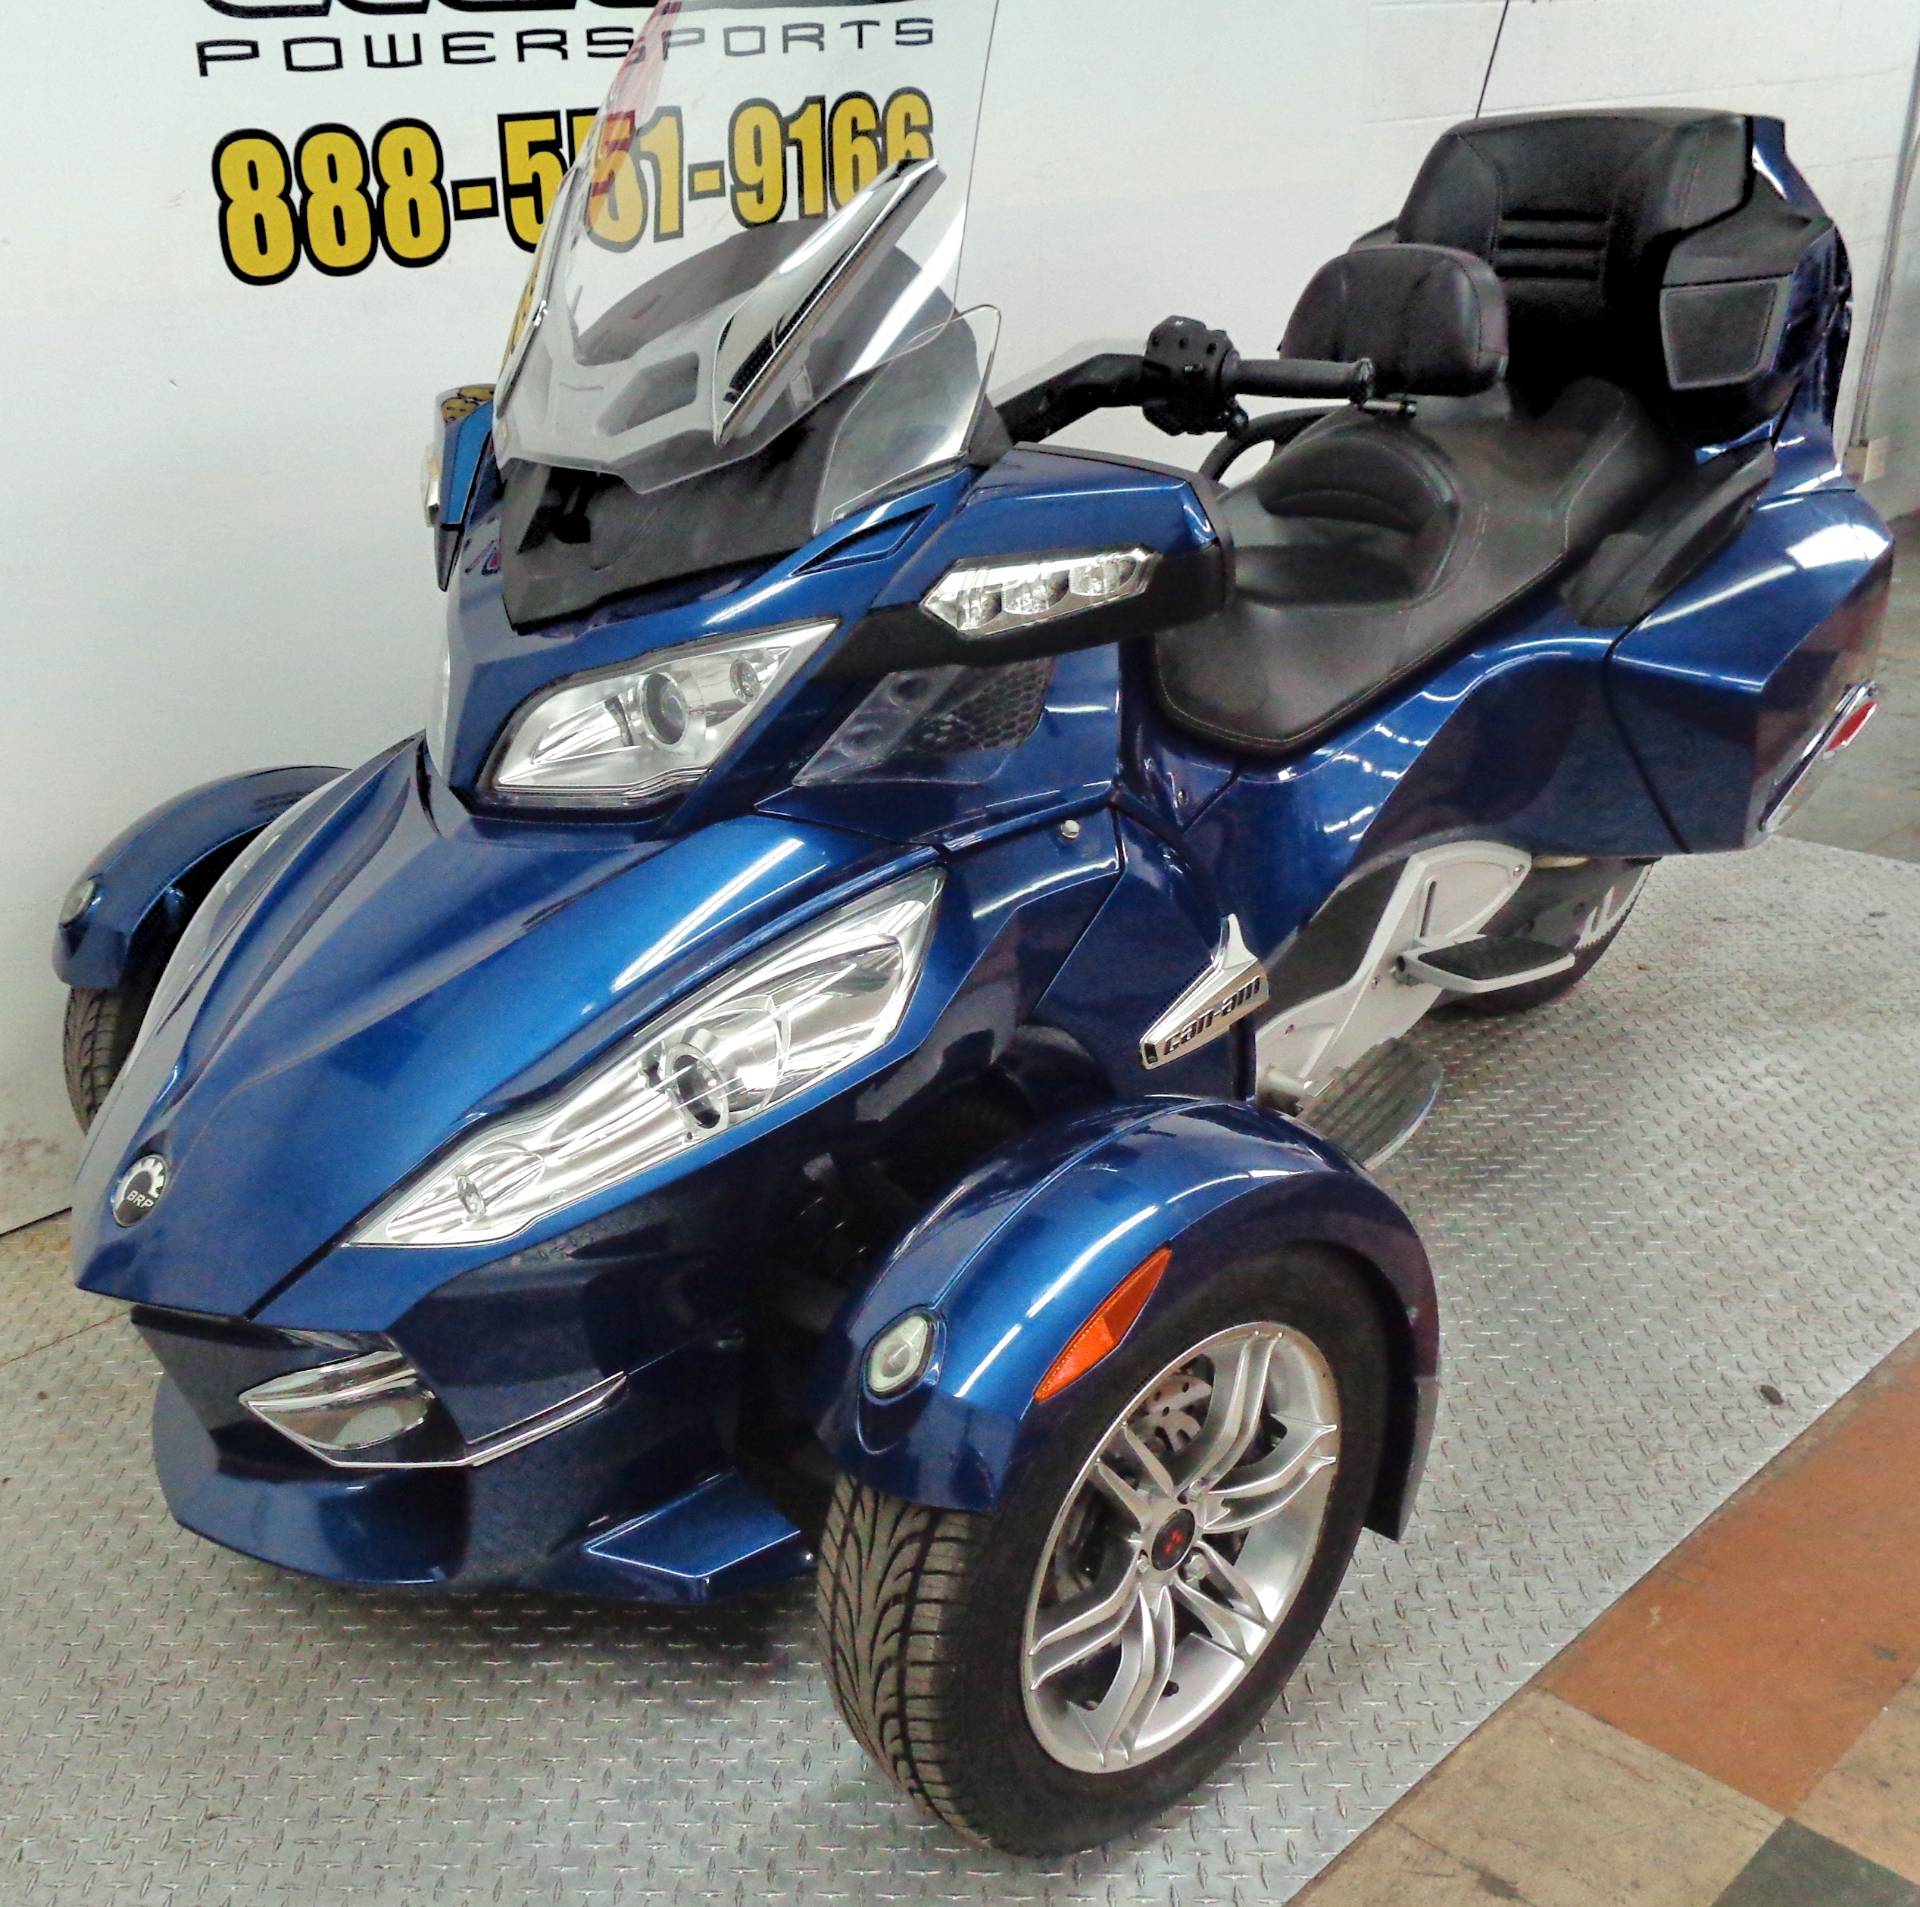 Used 2011 Can-Am Spyder® RT-S SE5 Motorcycles in Tulsa, OK ...